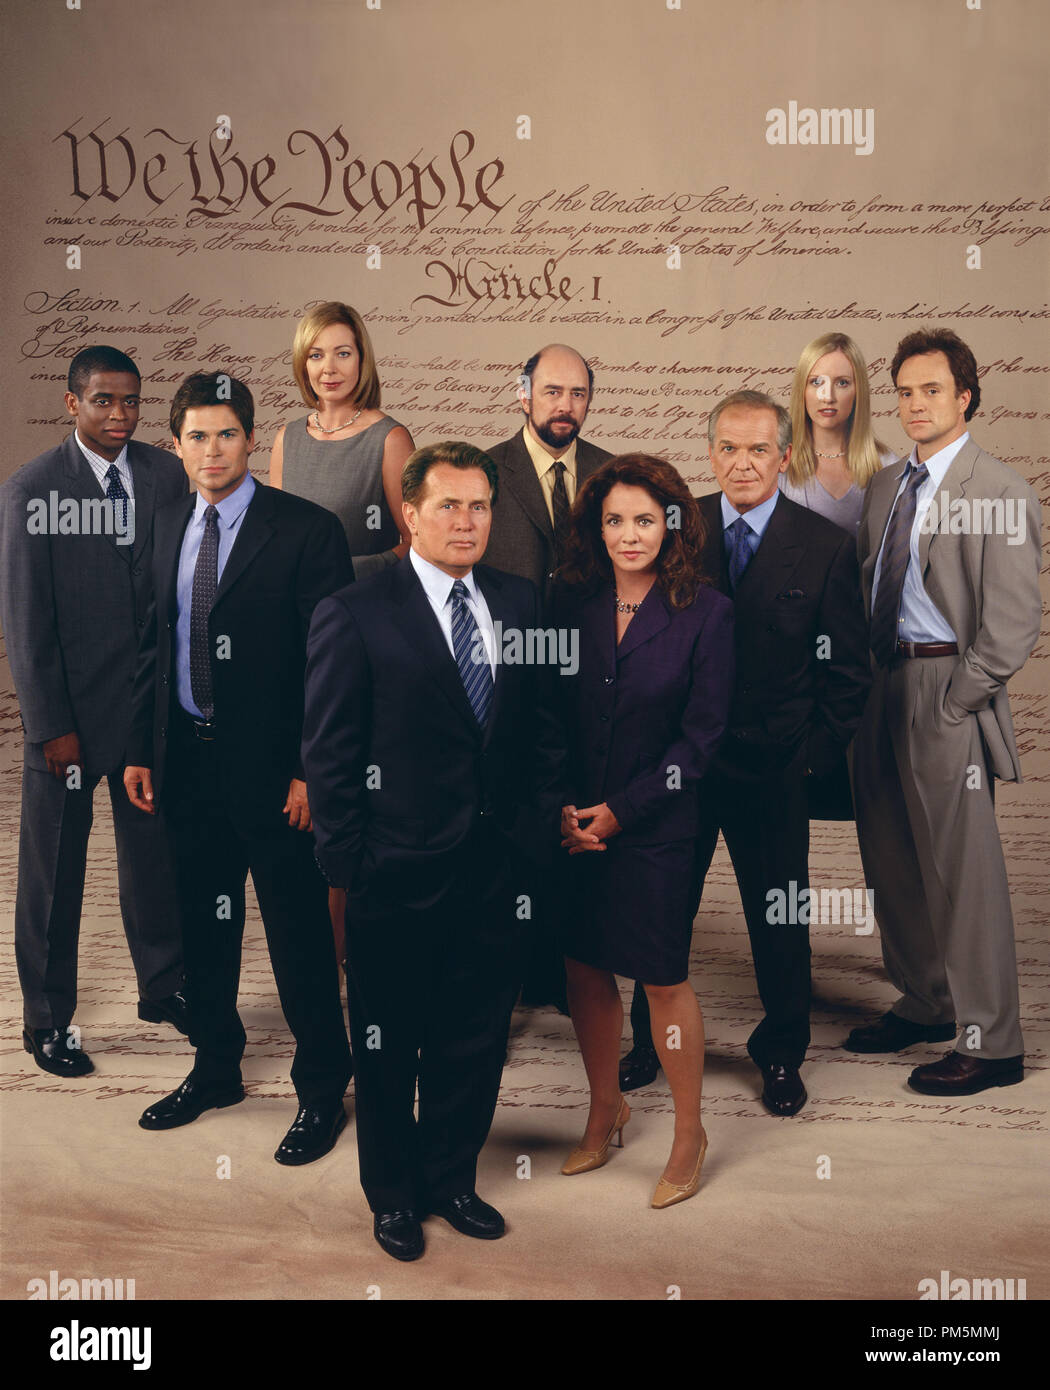 Film Still / Publicity Still from 'The West Wing' Richard Schiff, Allison Janney, Dule Hill, John Spencer, Martin Sheen, Rob Lowe, Janel Moloney, Bradley Whitford, Stockard Channing circa 2001 Photo credit: David Rose    File Reference # 30847099THA  For Editorial Use Only -  All Rights Reserved Stock Photo